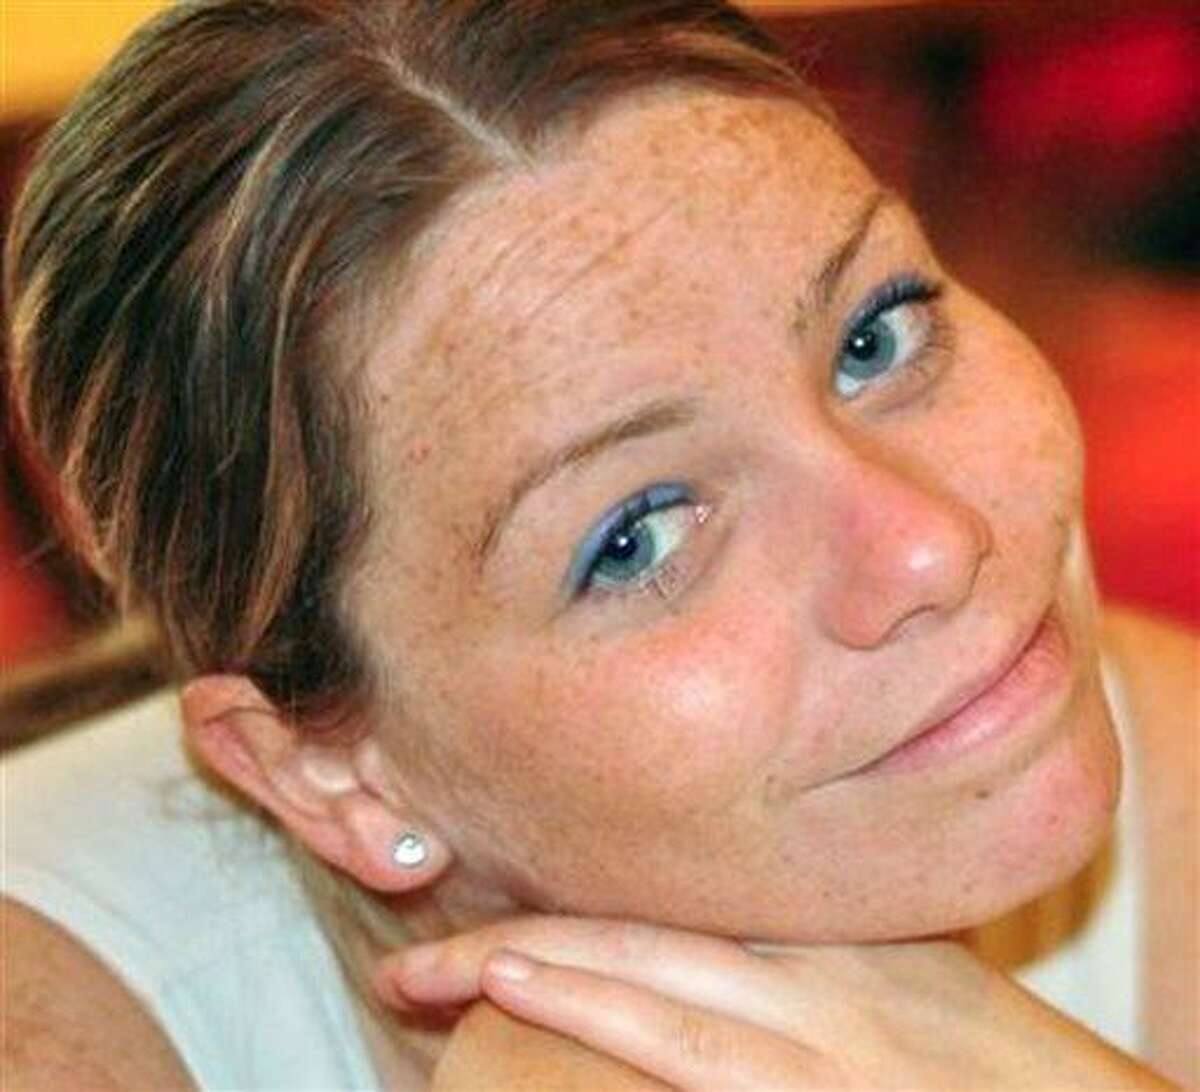 This undated photo provided by the family shows Krystle Campbell. Campbell, 29, a restaurant manager from Medford, Mass., was among the people killed in the explosions at the finish line of the Boston Marathon, Monday, April 15, 2013, in Boston. (AP Photo/Campbell Family)